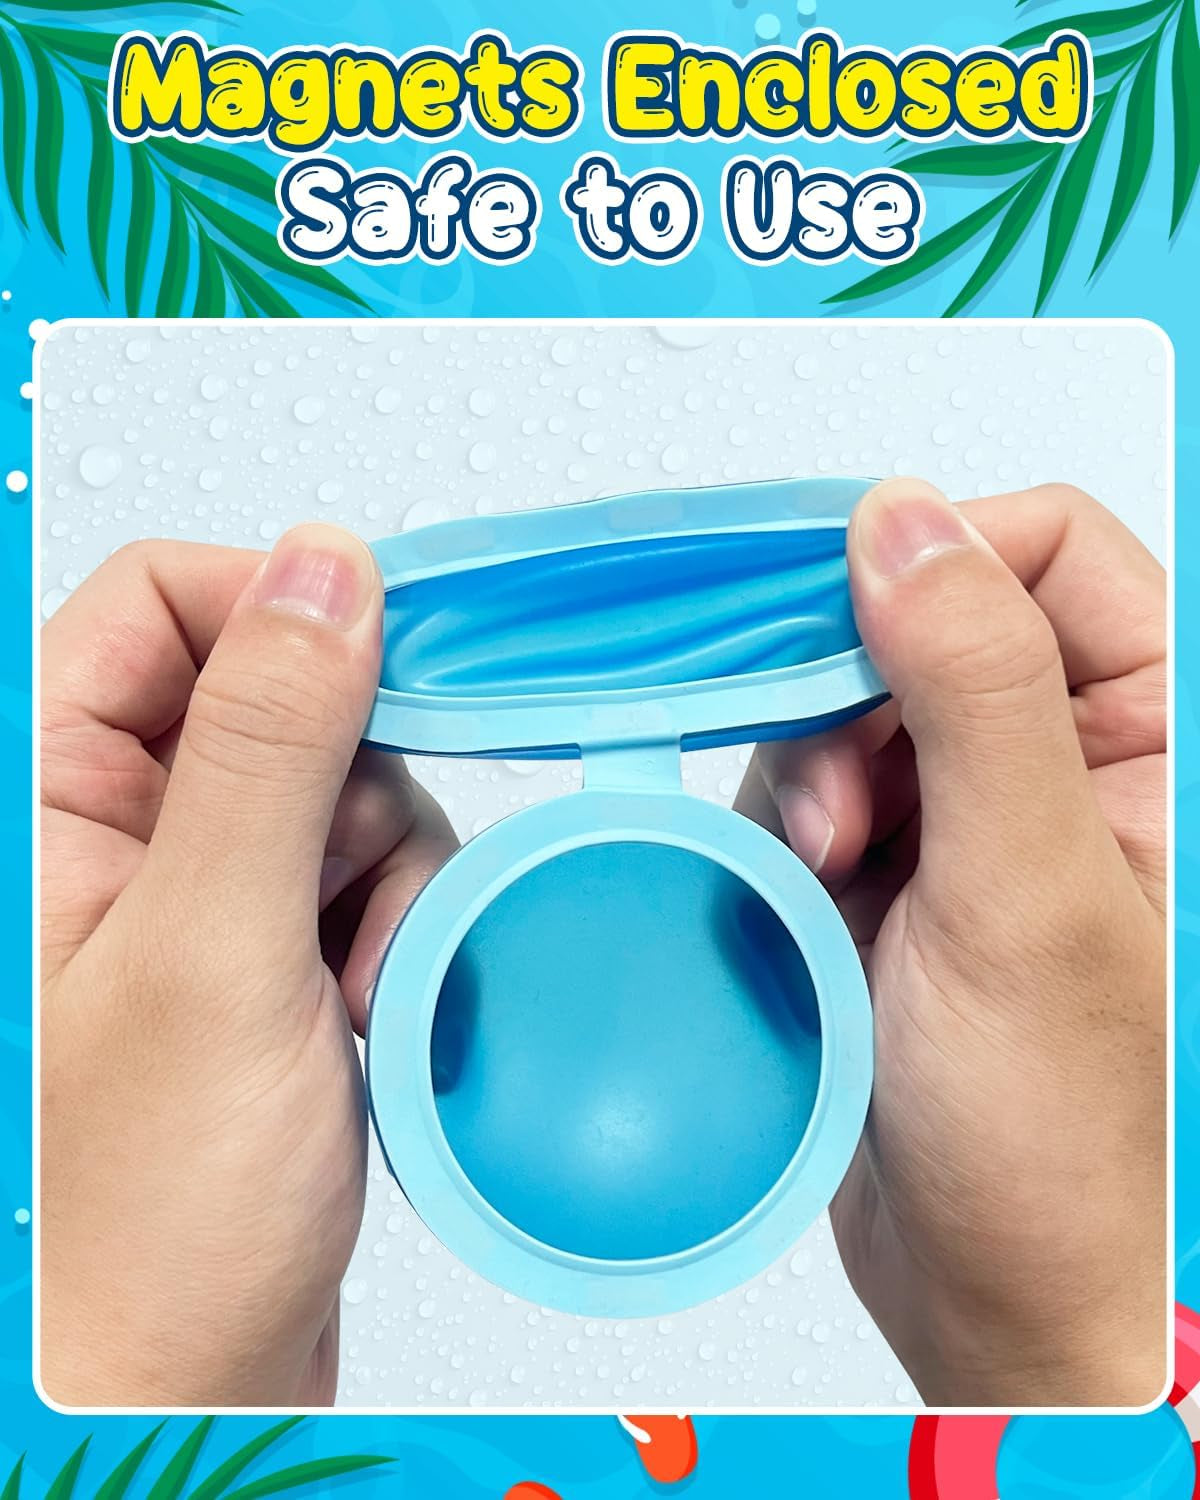 Reusable Water Balloons for Kids - 【12 Pack】 Magnetic Silicone Water Bomb with Mesh Bag, Summer Toys Swimming Pool Party Supplies Bath Toy Outdoor Idea Gift for Kids